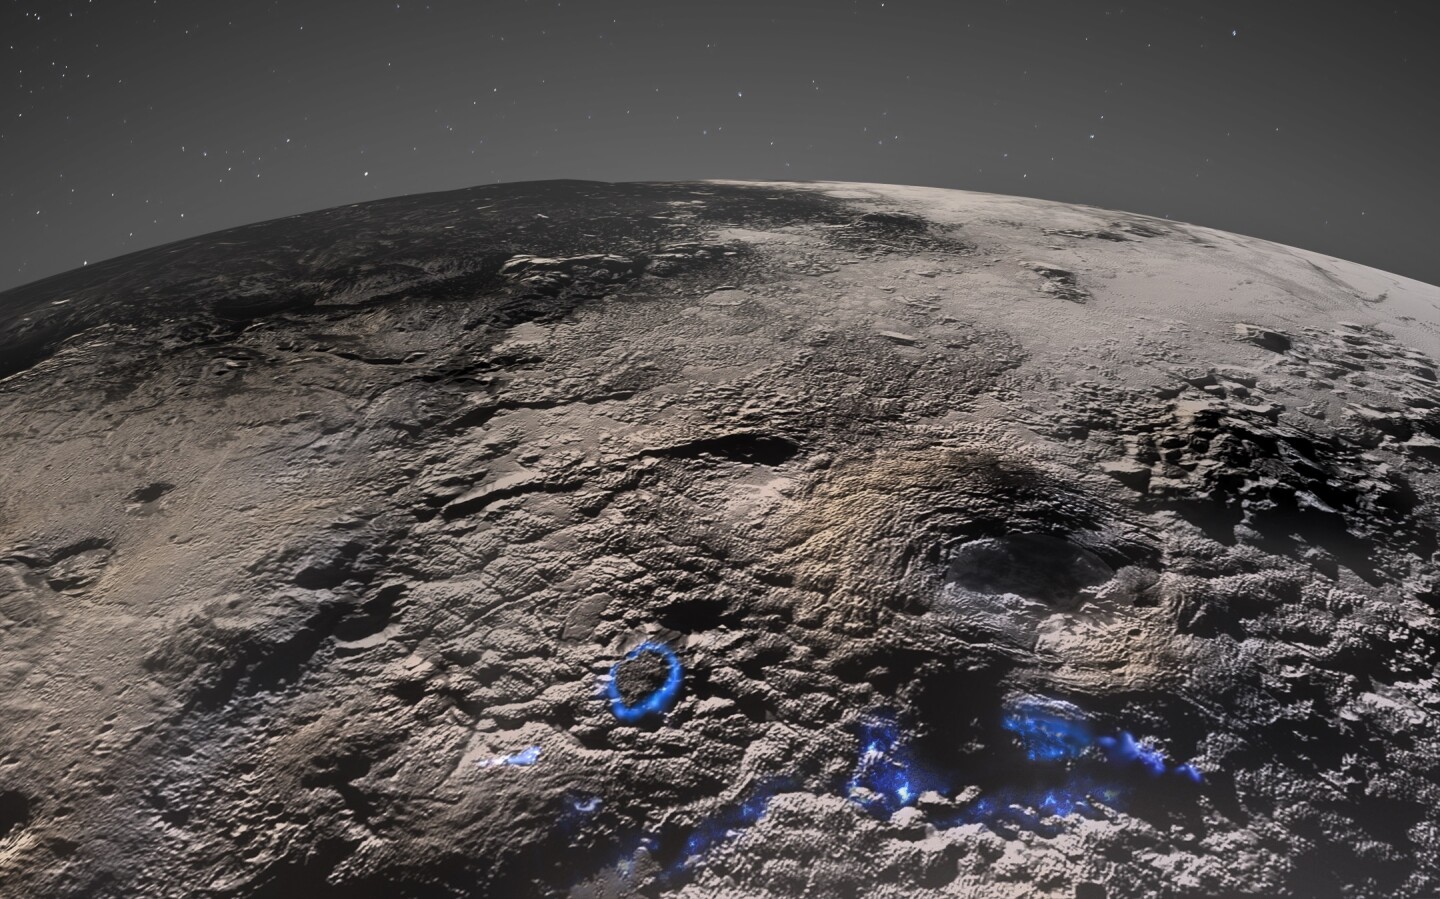 New Horizons images of Pluto's surface, showing the region that may have been produced through cryovolcanism. The areas highlighted in blue indicate how past cryovolcanic activity may have occurred